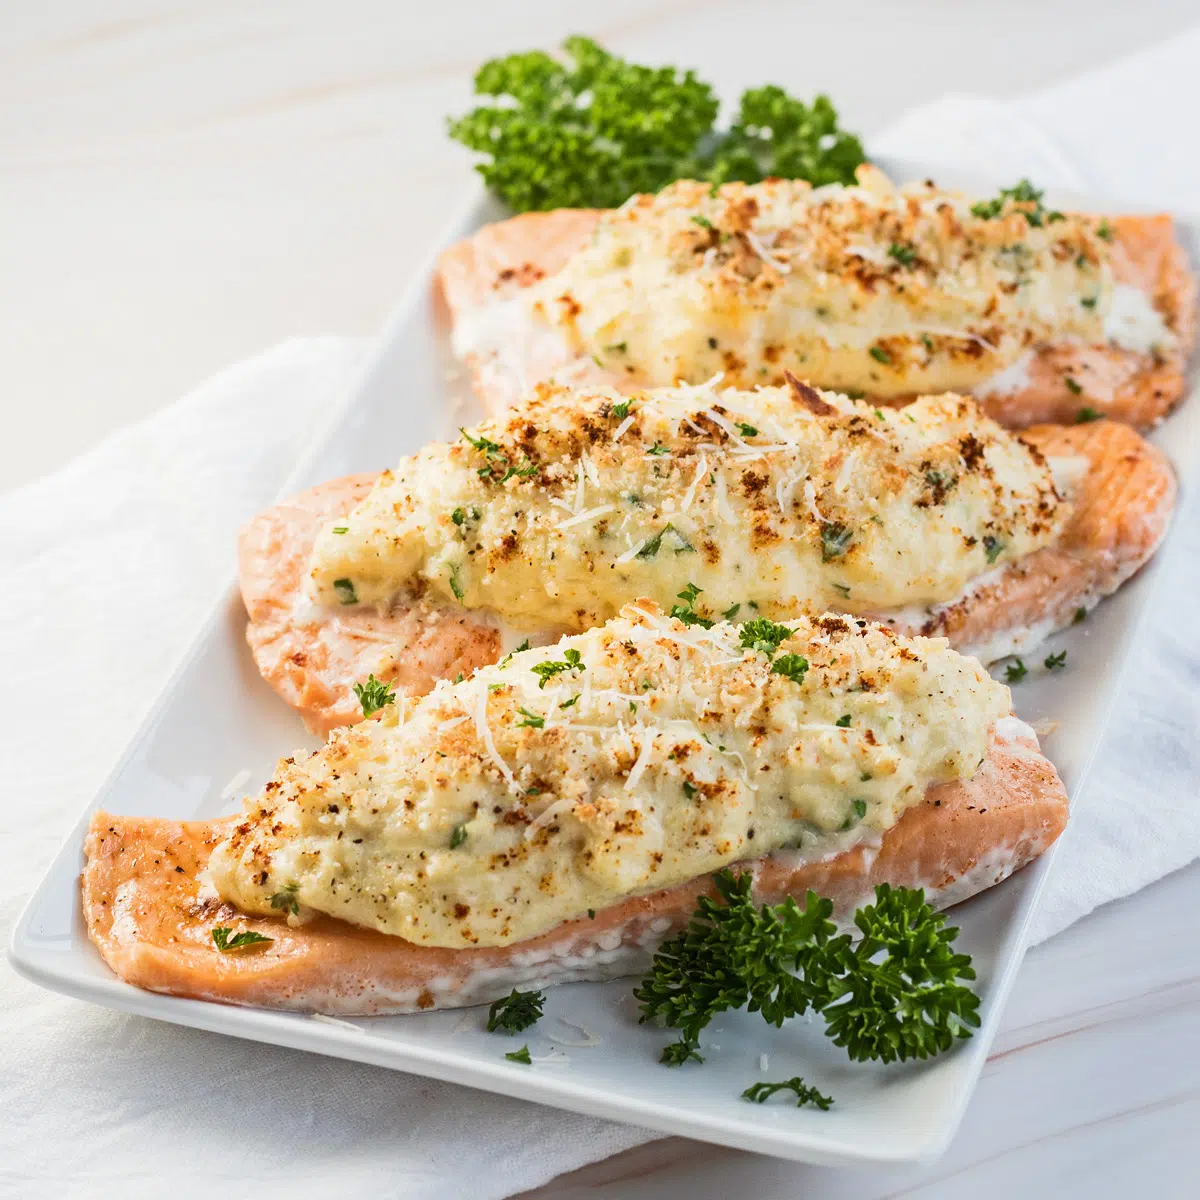 Crab stuffed salmon served on white plate garnished with fresh parsley.